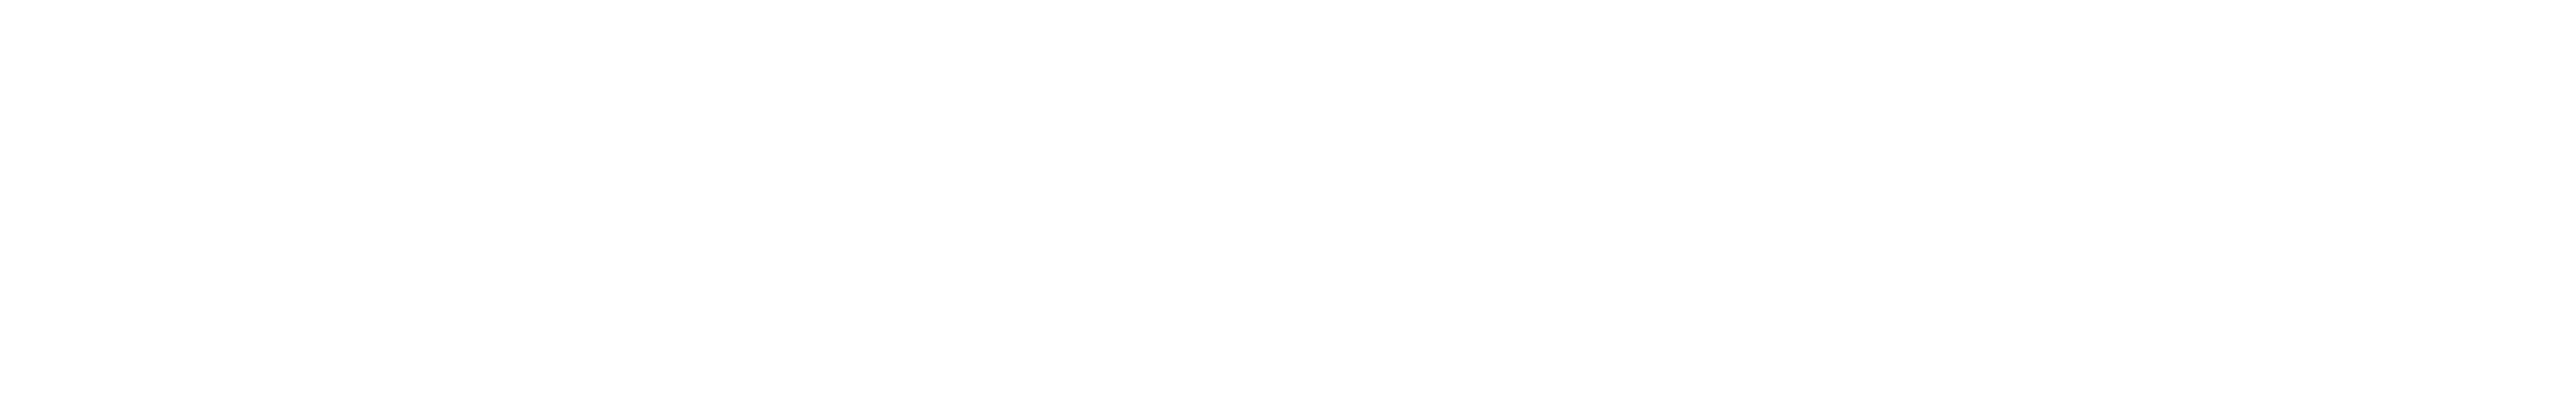 aluxes logo png